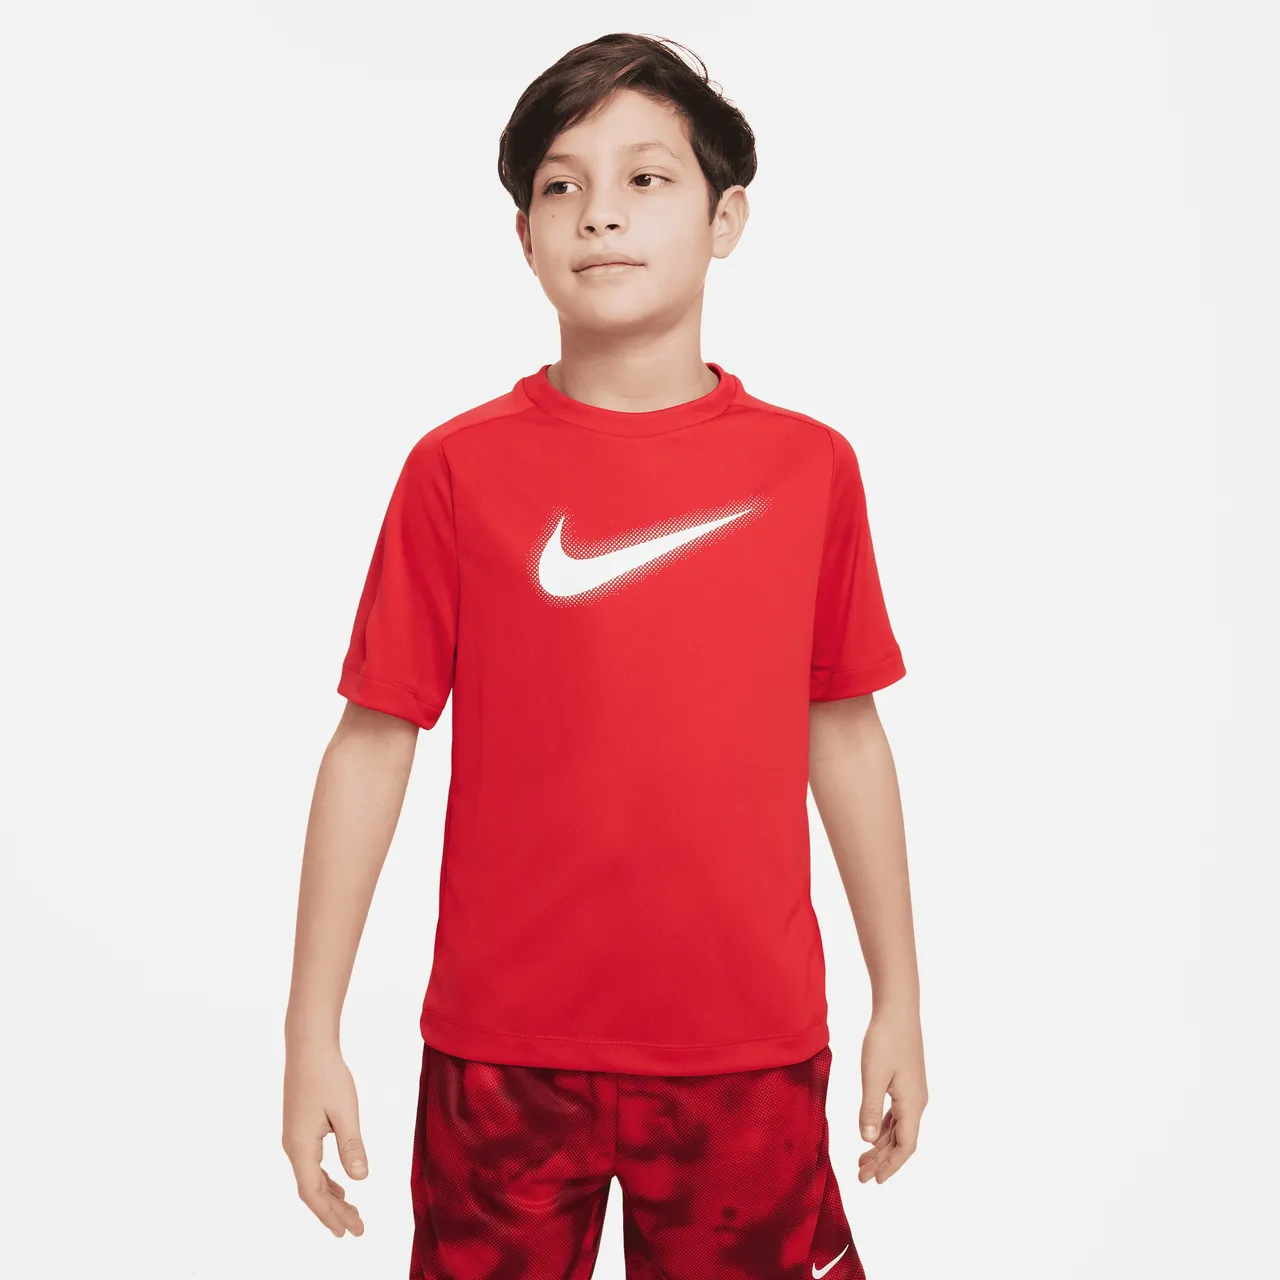 Nike Multi Older Kids' (Boys') Dri-FIT Graphic Training Top - Red - Polyester